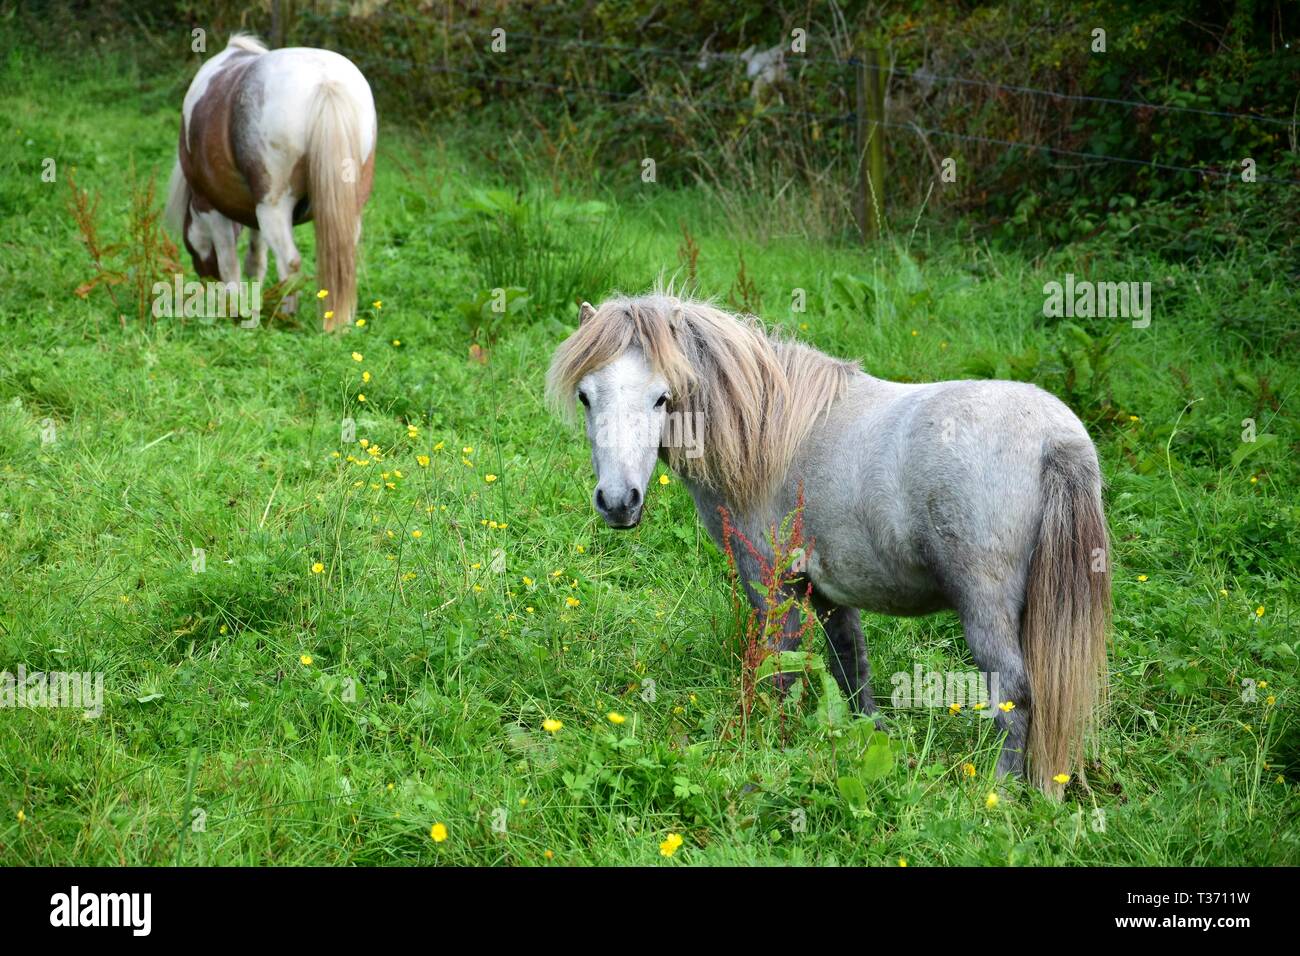 Cute gray Shetland pony in Ireland. Another horse in the background. Stock Photo